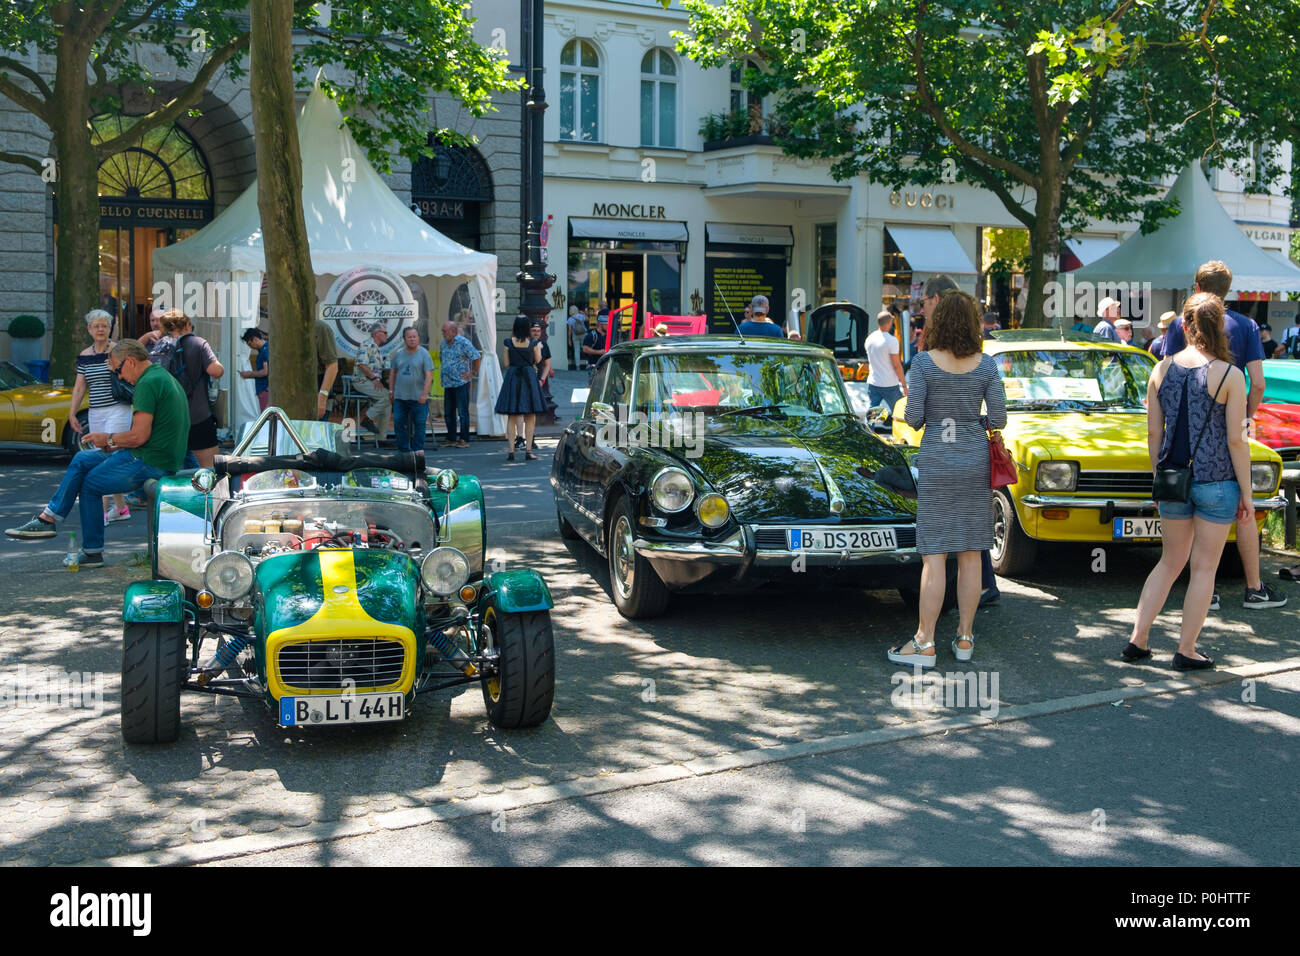 Berlin, Germany - june 09, 2018: People at Berlin Classic Days, a Oldtimer automobile event showing more than 2000 vintage cars and historic vehicles at Kurfuerstendamm / Kudamm in Berlin Credit: hanohiki/Alamy Live News Credit: hanohiki/Alamy Live News Stock Photo